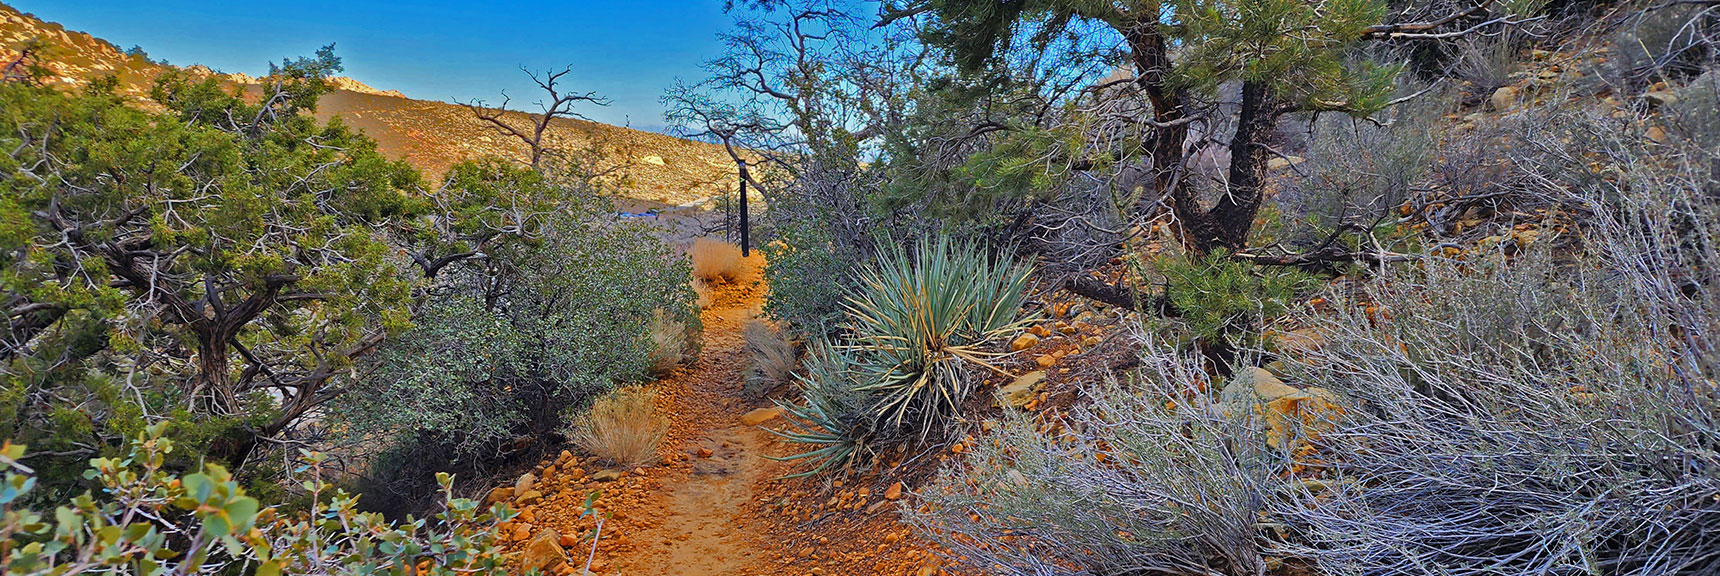 Large Variety of Plant Life from Yucca to Pines | Willow Spring Loop, Petroglyph Canyon, Lost Creek Canyon | Red Rock Canyon National Conservation Area, Nevada